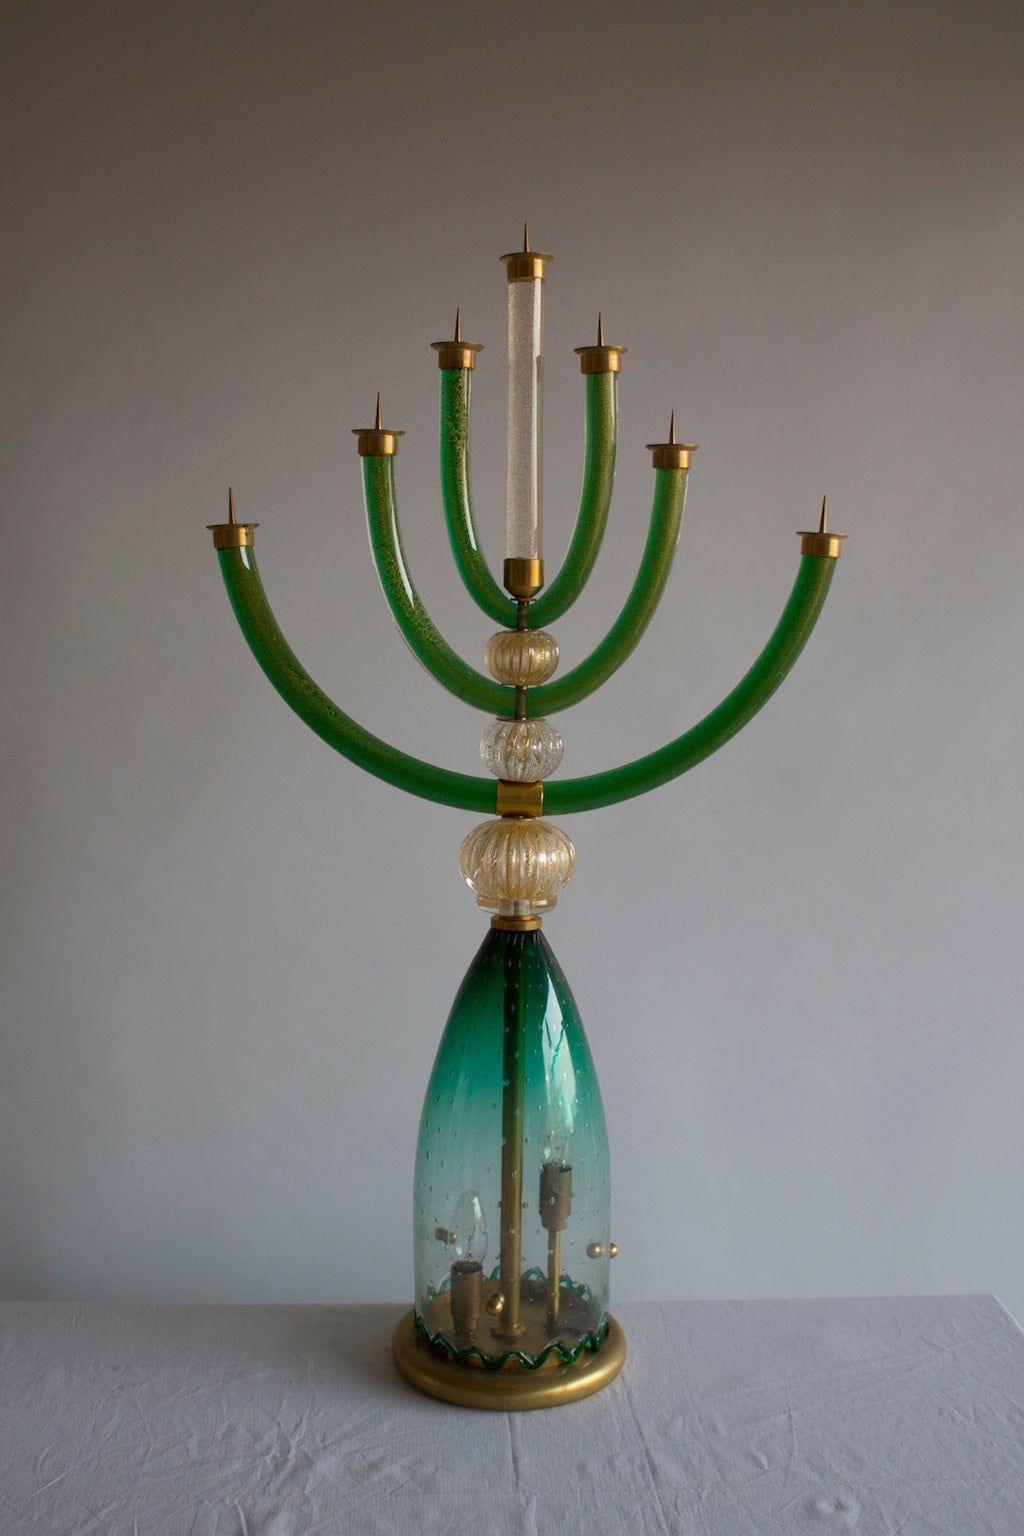 Amazing  and rare Murano Menorah in green and transparent color with gold finishings, in excellent original condition, from circa 1950s, with a brass frame, and  inside the base there is two lights. The Menorah is 37 inches high, 8 inches deep by 21